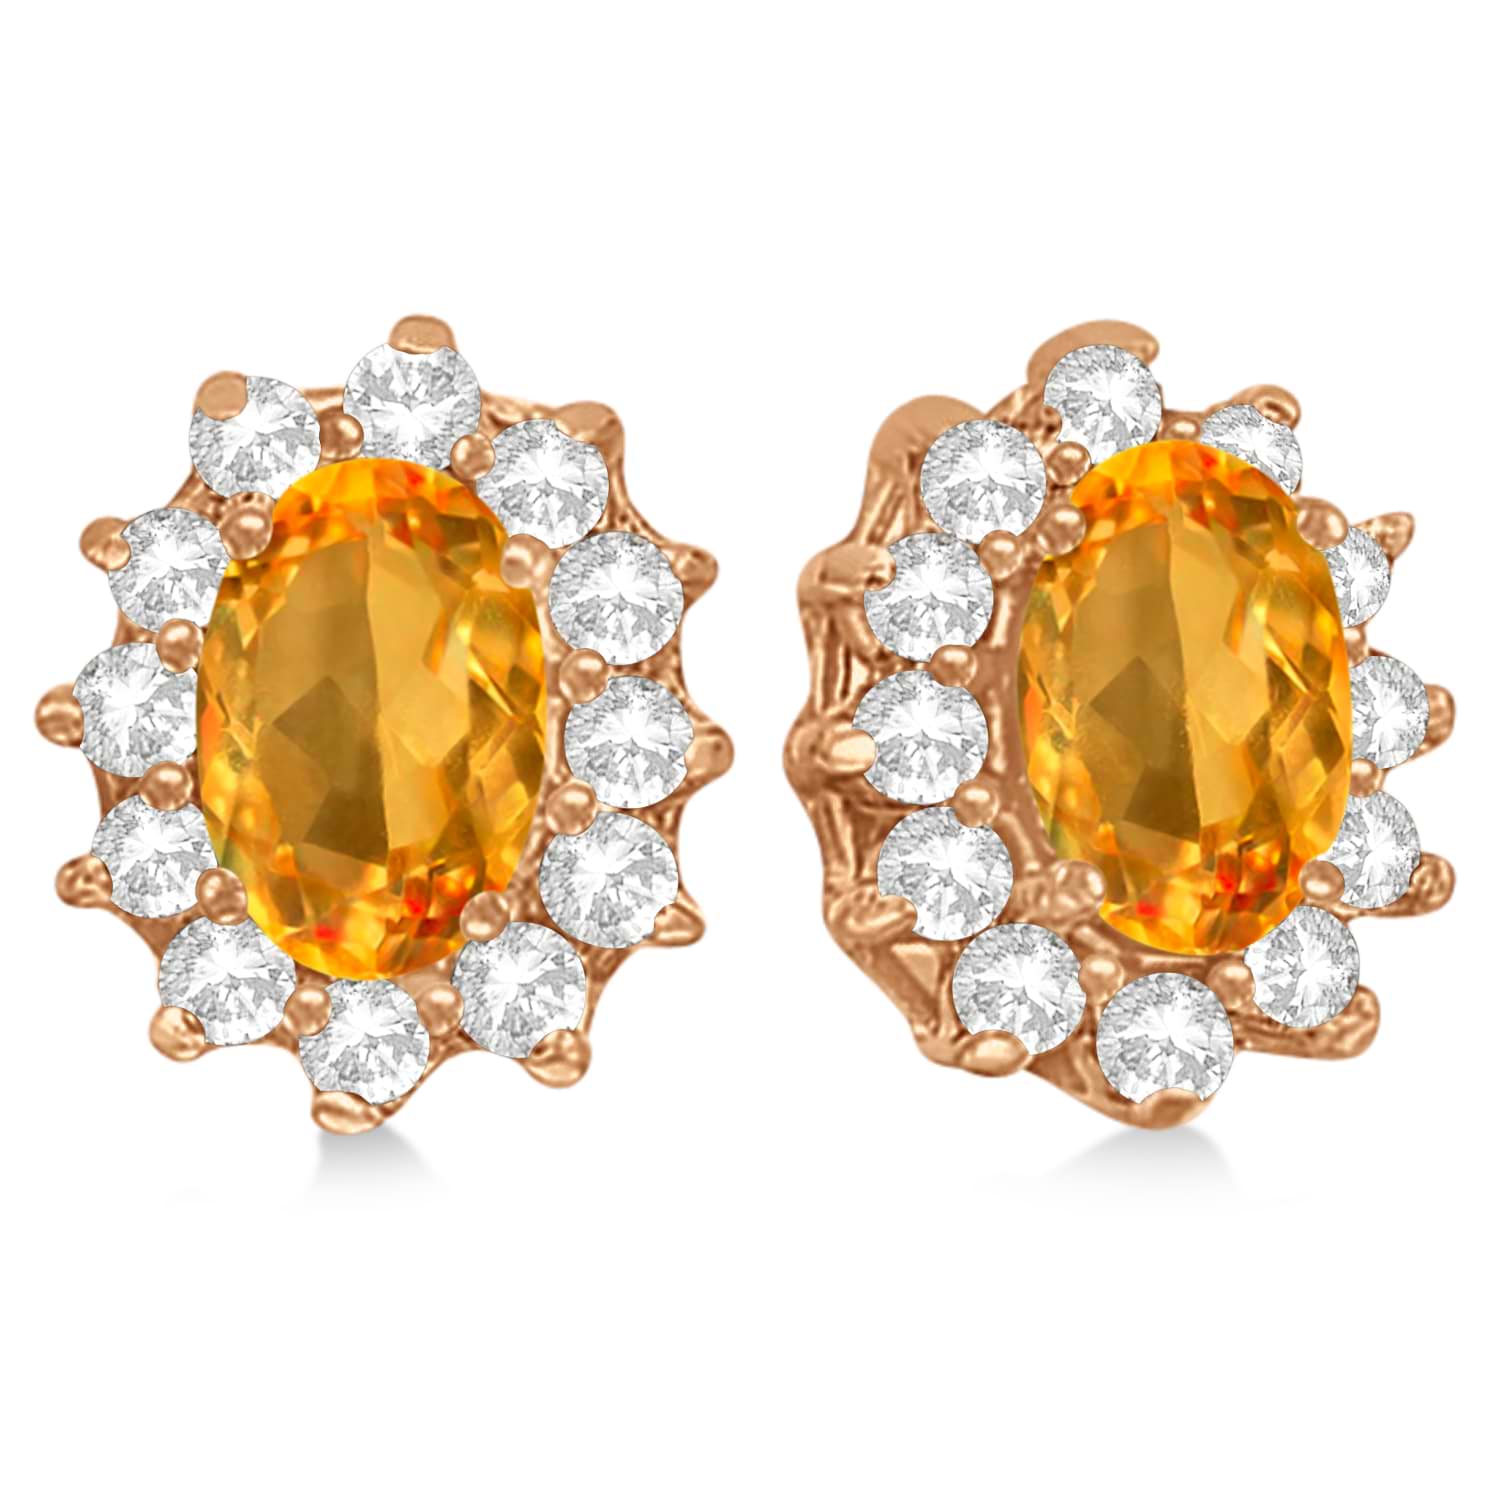 Oval Citrine & Diamond Accented Earrings 14k Rose Gold (2.05ct)